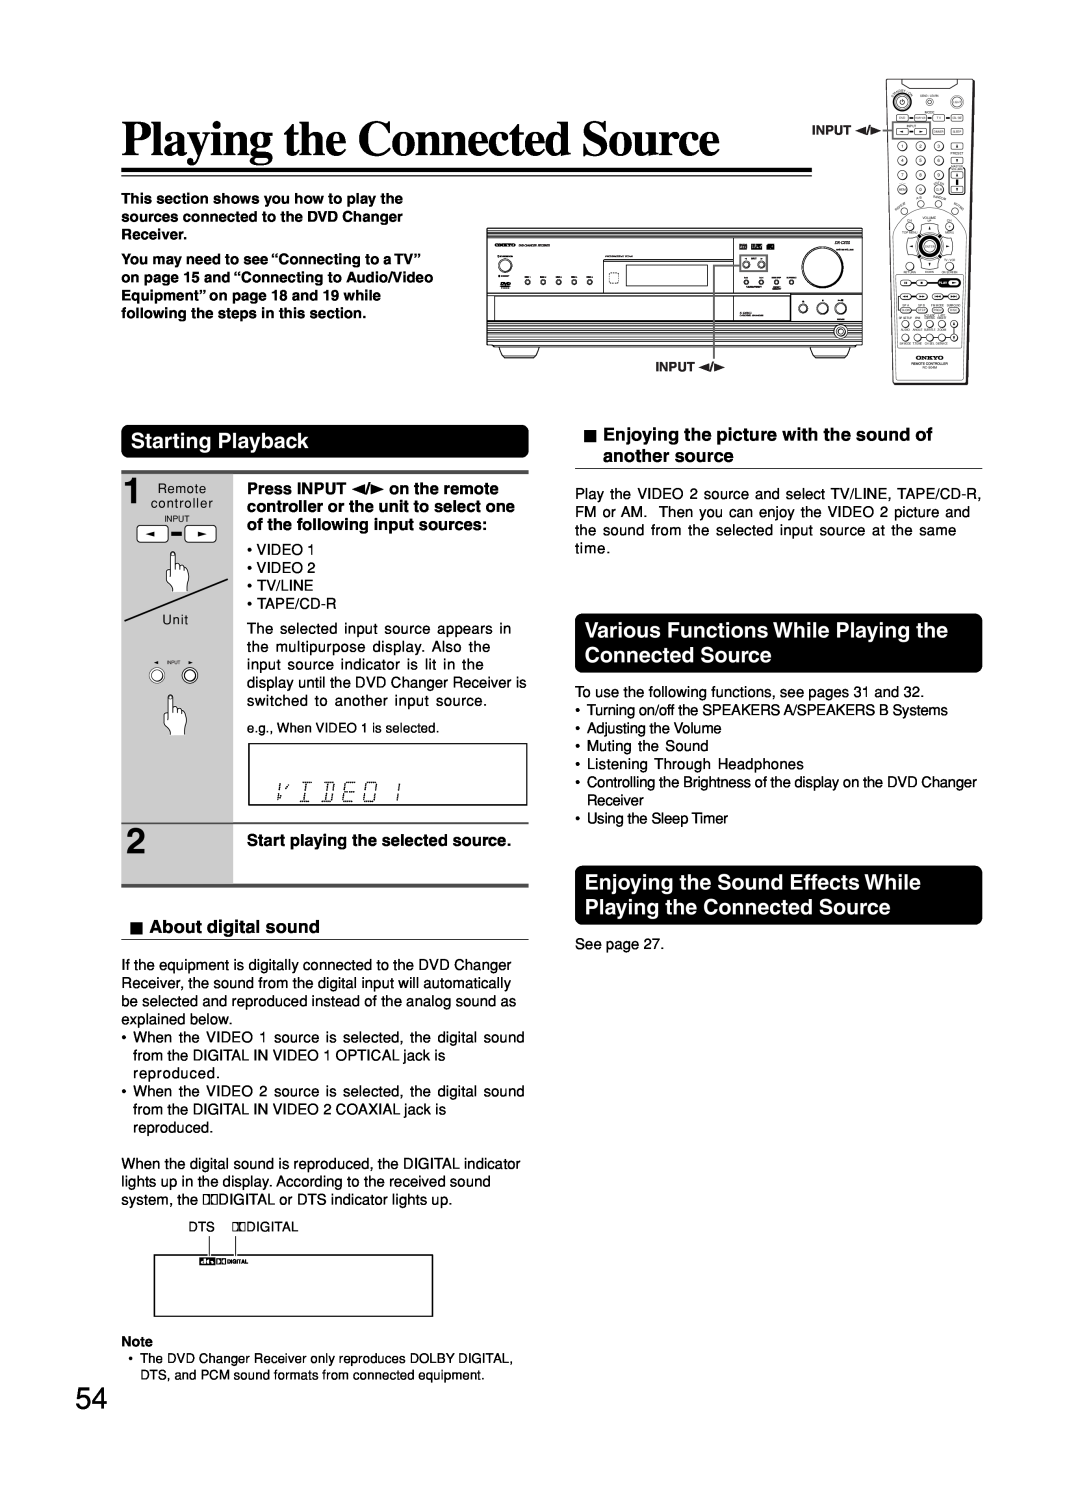 Onkyo DR-C500 instruction manual Playing the Connected Source, Starting Playback 